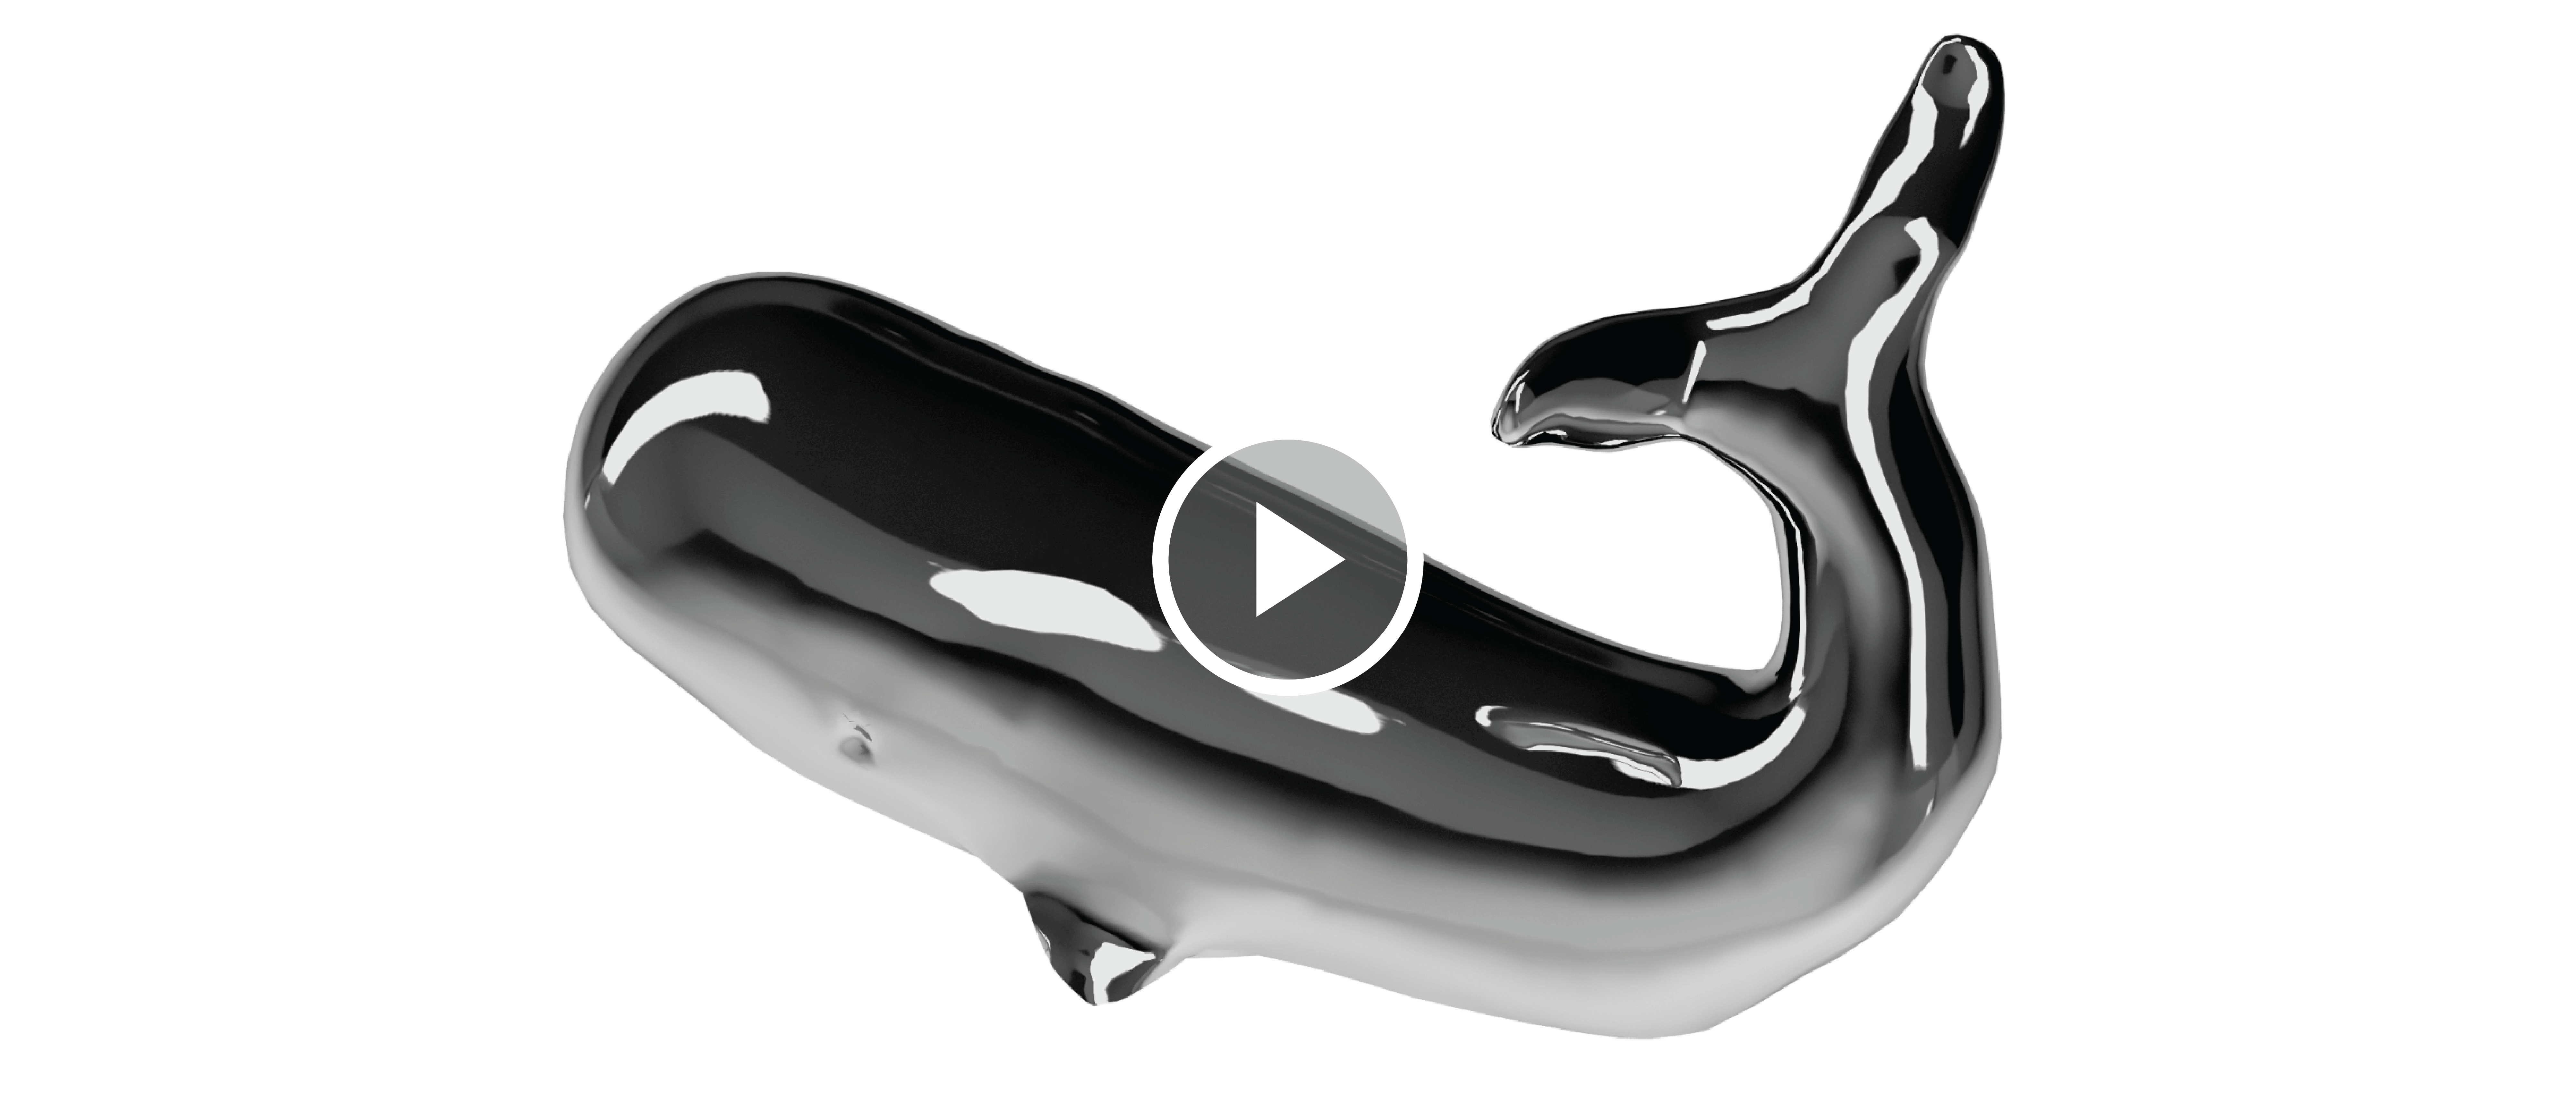 Generalized Scene Reconstruction of Chrome Whale